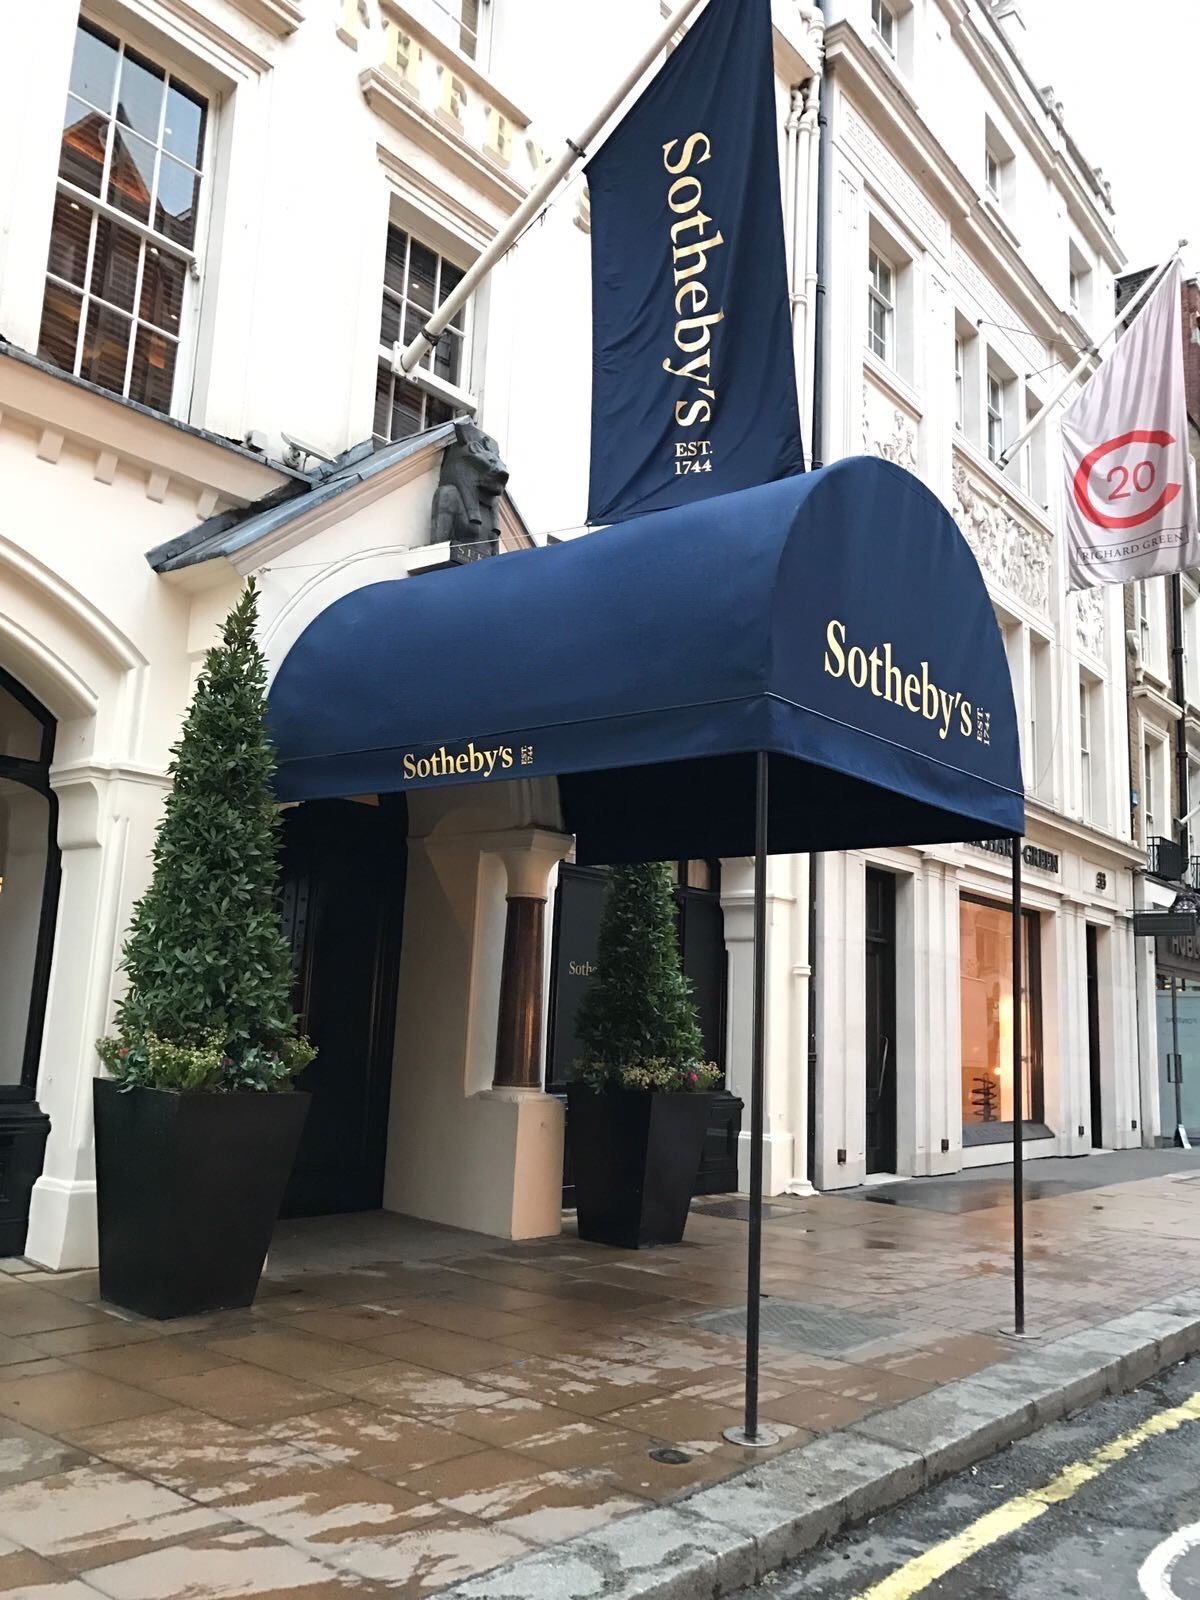 Sotheby's awning 1b